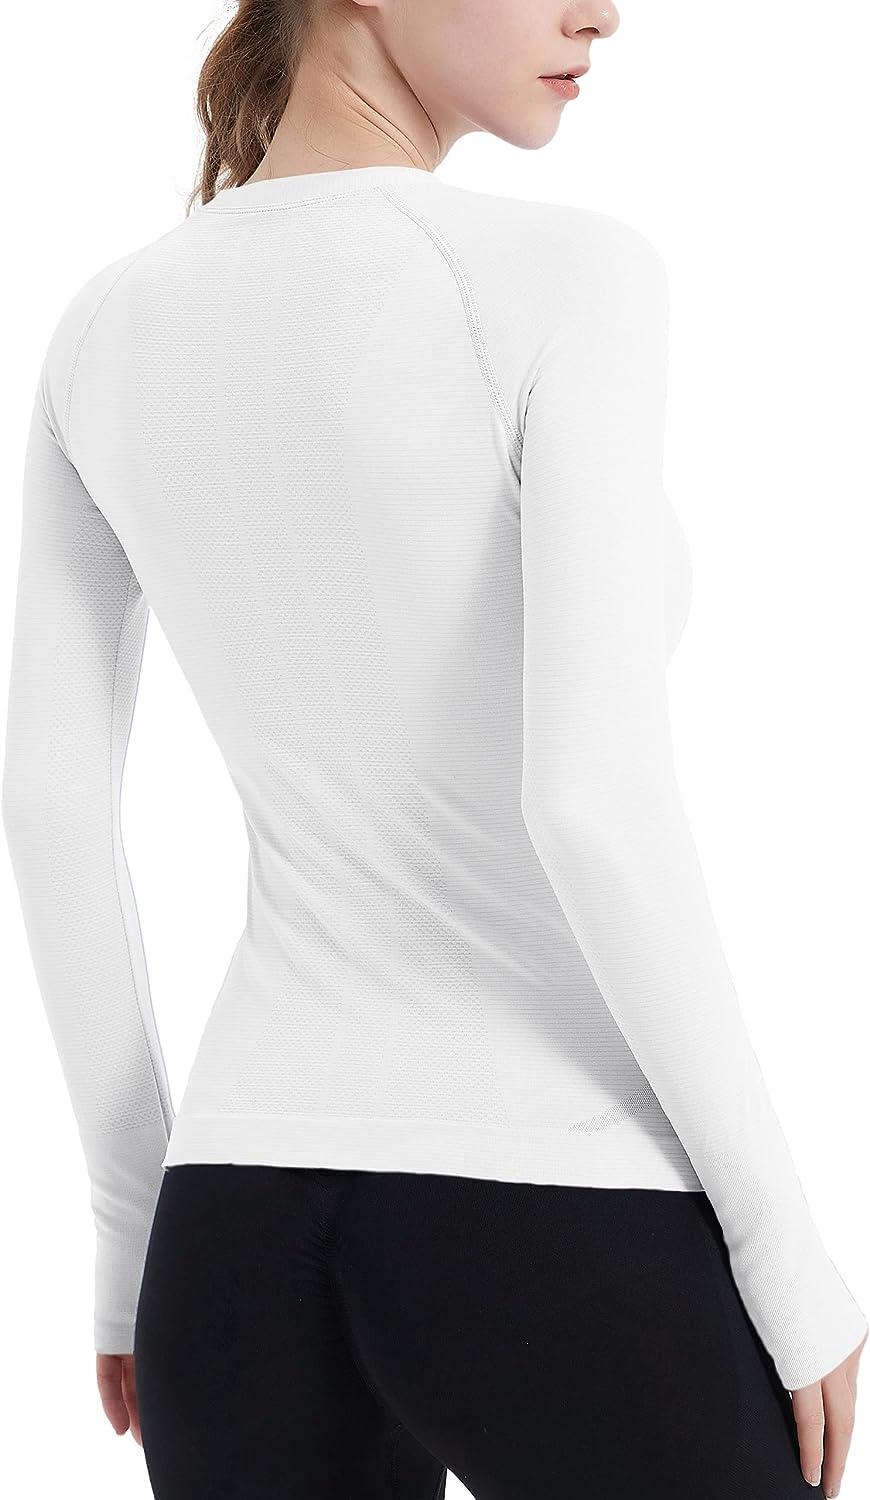 MathCat Workout Shirts for Women,Long Sleeve Athletic Shirt Women Seamless  Workout Tops for Women, Yoga Compression Shirt X-Small White